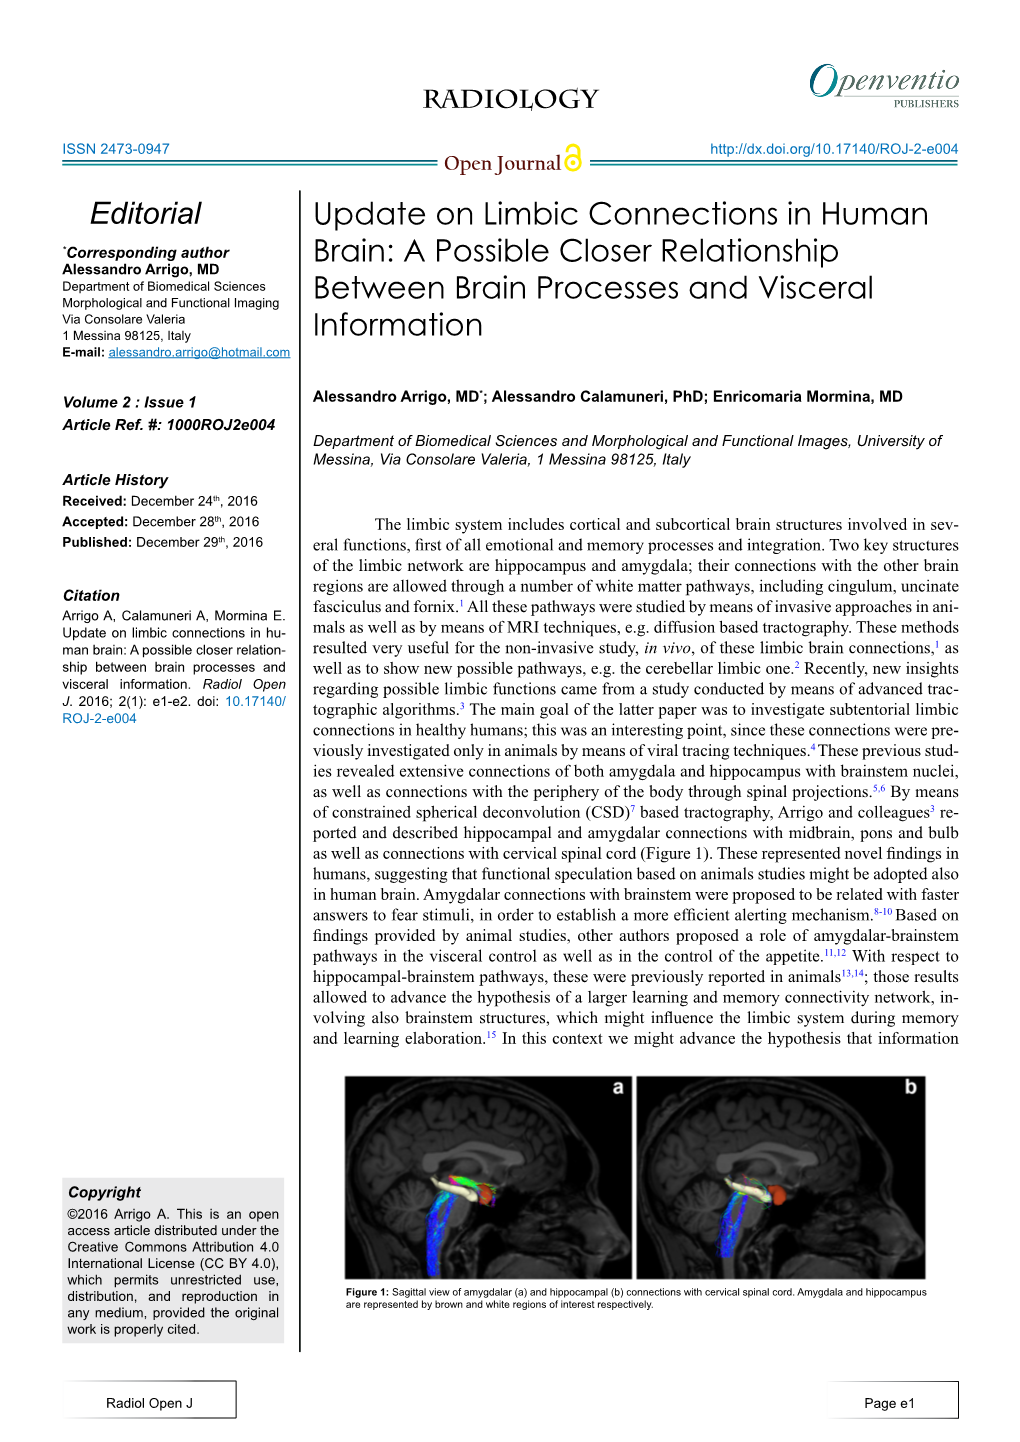 Update on Limbic Connections in Human Brain